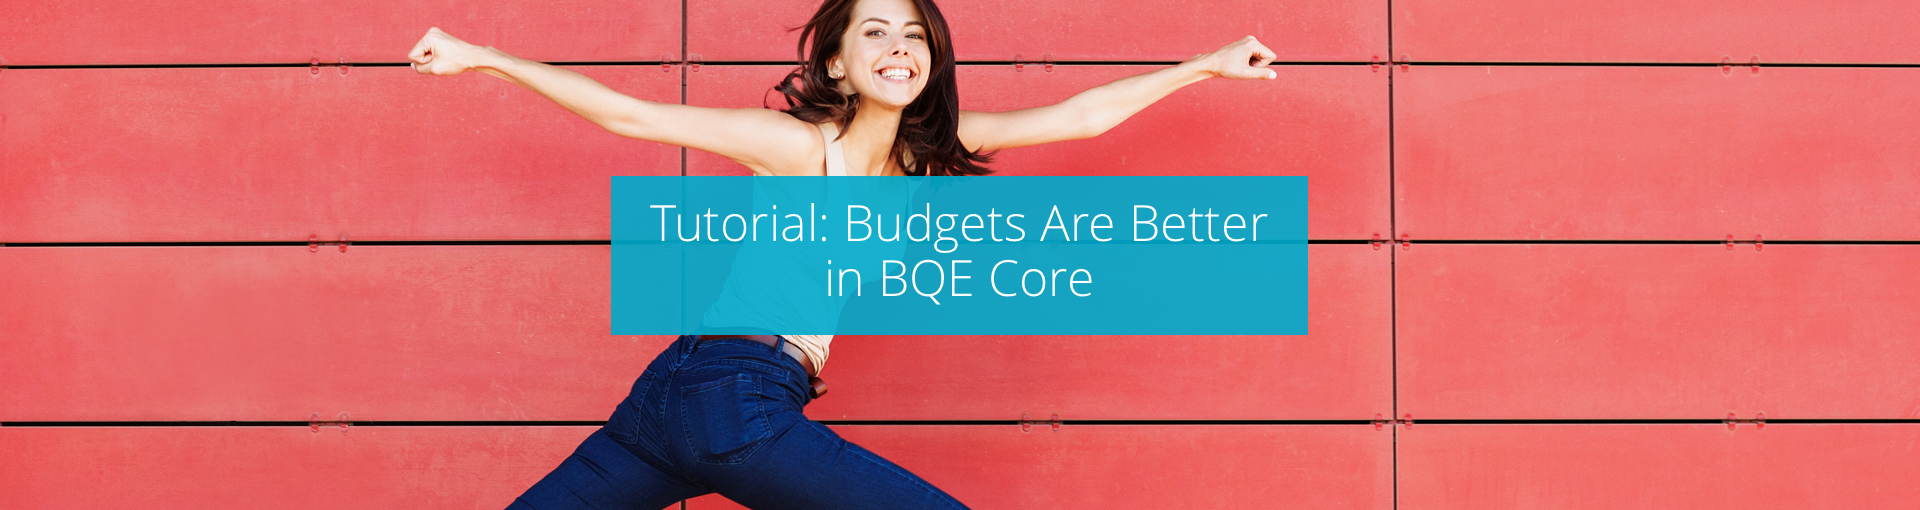 Tutorial: Budgets Are Better in BQE CORE Featured Image